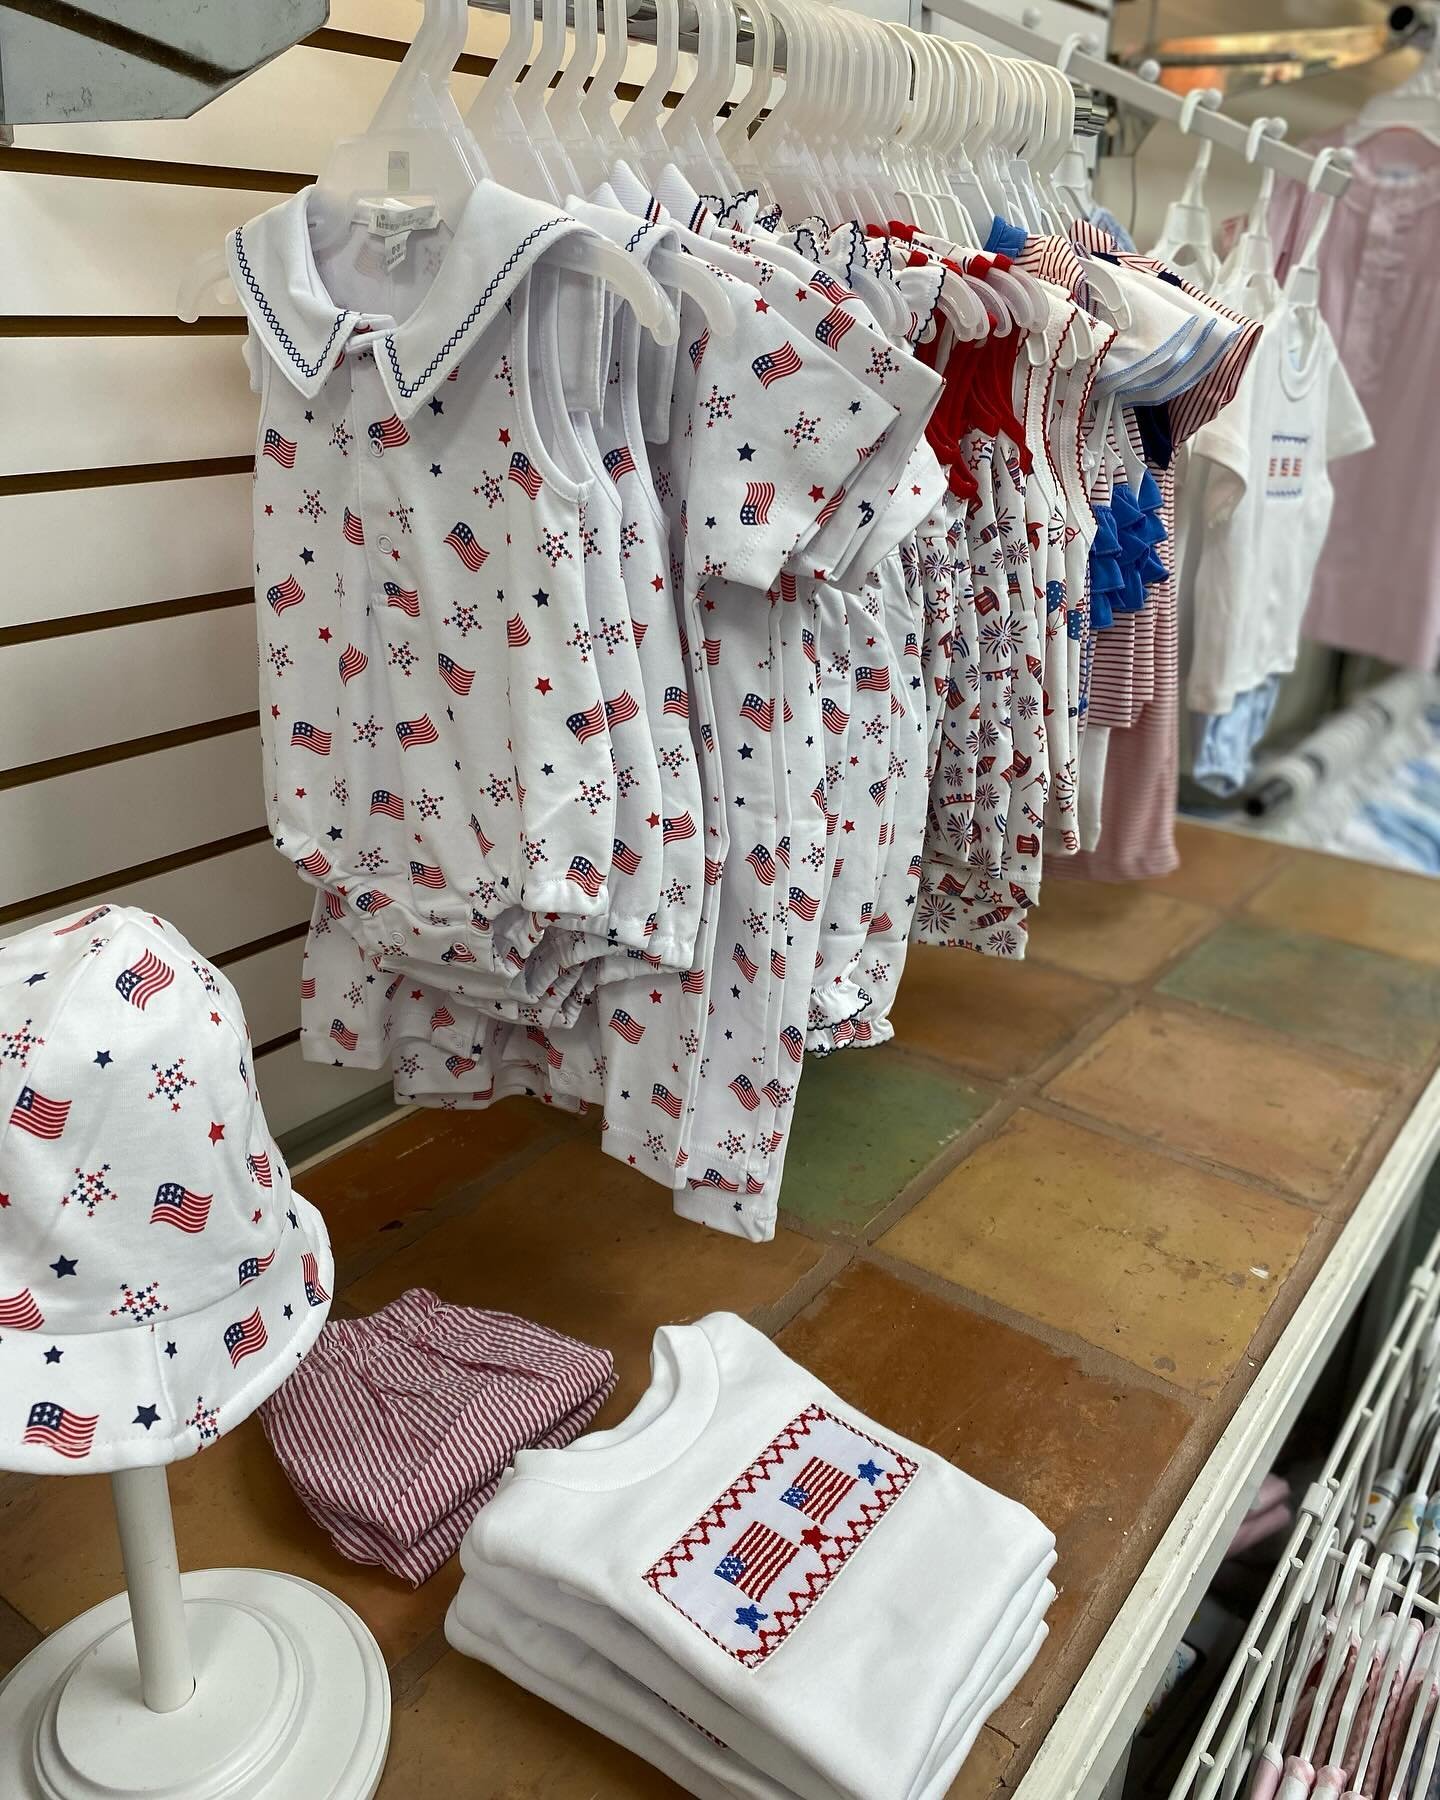 New arrivals&hellip;just in time for Memorial Day! 

Adorable flag clothing that will be perfect for Memorial Day and July 4th holidays! 🇺🇸🇺🇸🇺🇸
.
.
#childrensshop #childrensshopatl #flags #patrioticclothing #memorialday #kissykissy #magnoliabab